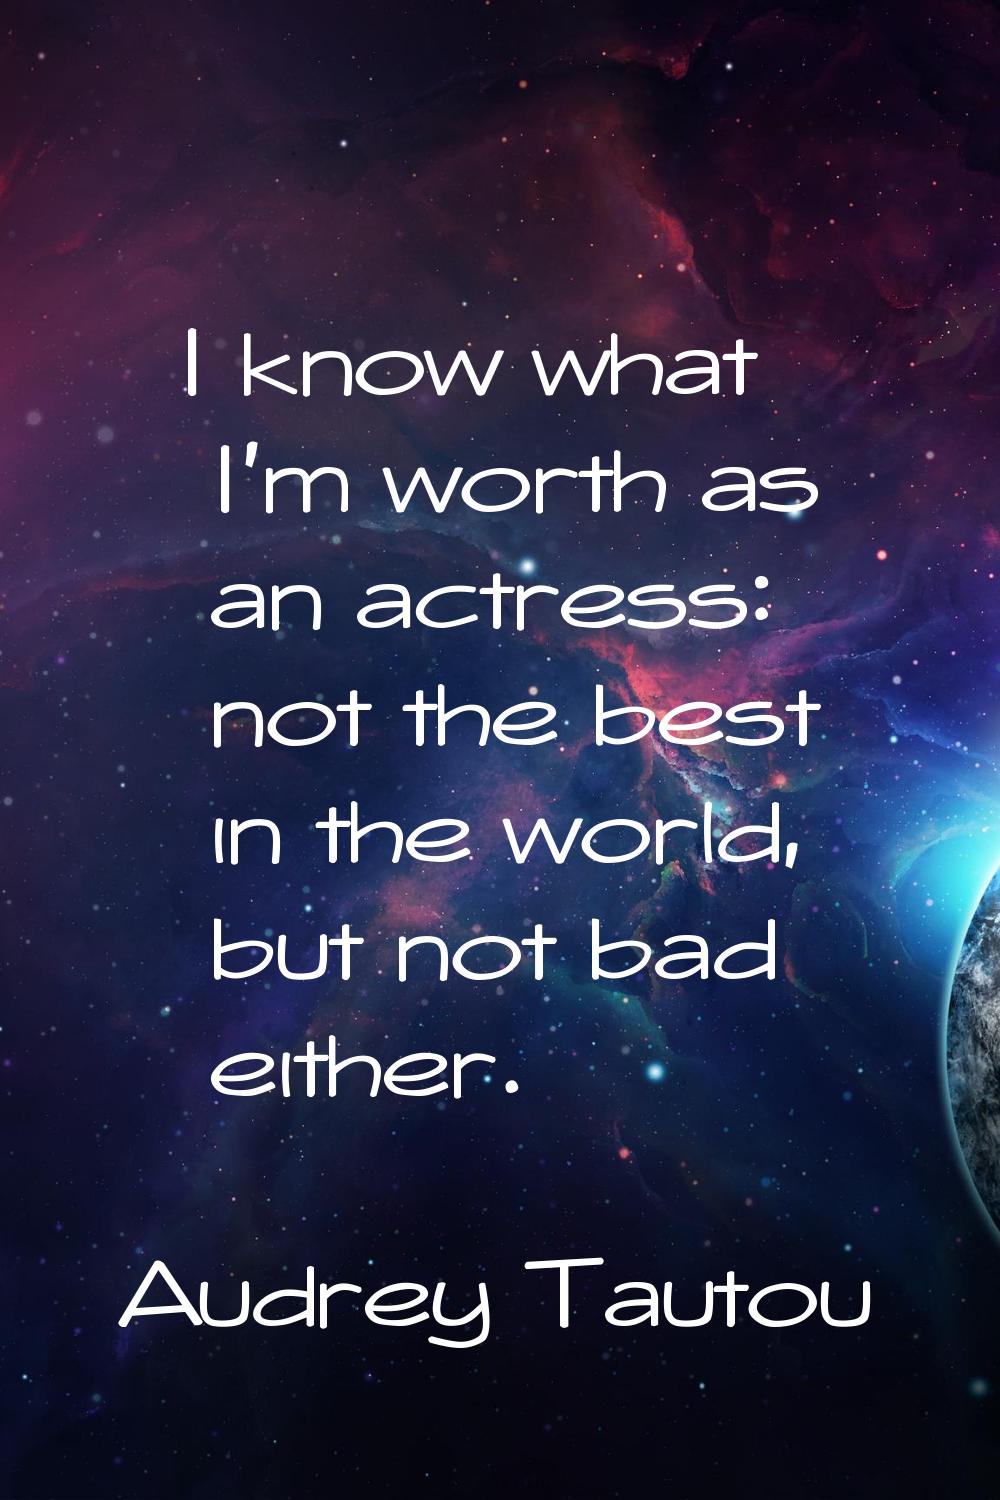 I know what I'm worth as an actress: not the best in the world, but not bad either.